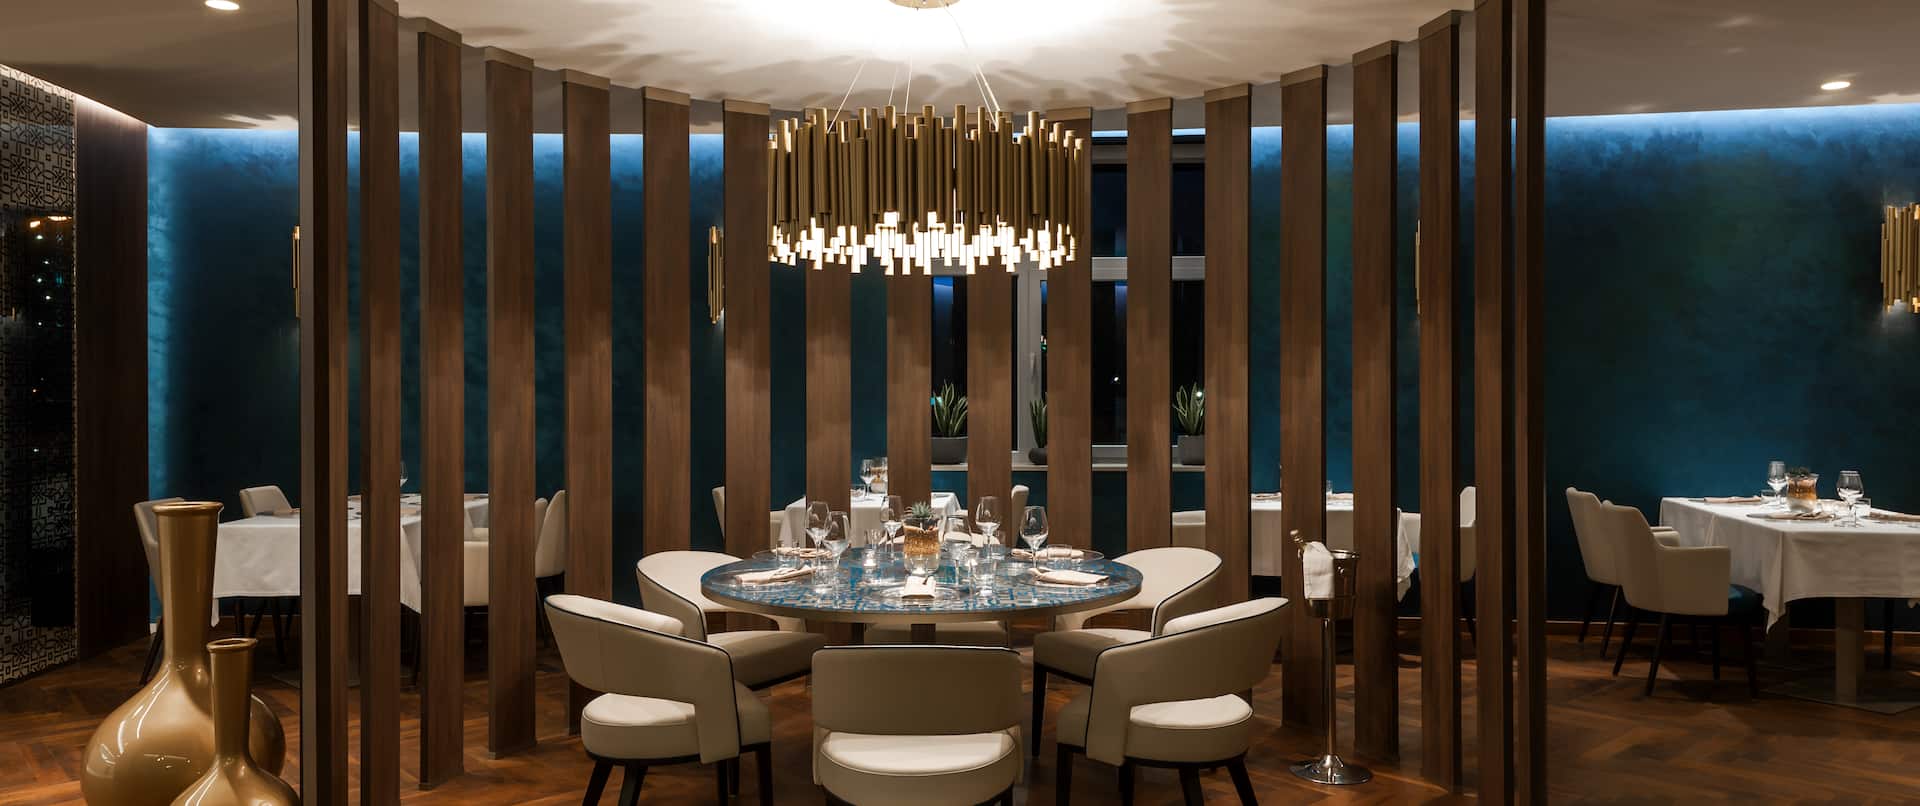 Circular Dining Area With Wood Partition, Seating For Six at Round Table Under Chandelier in Restaurant Gold